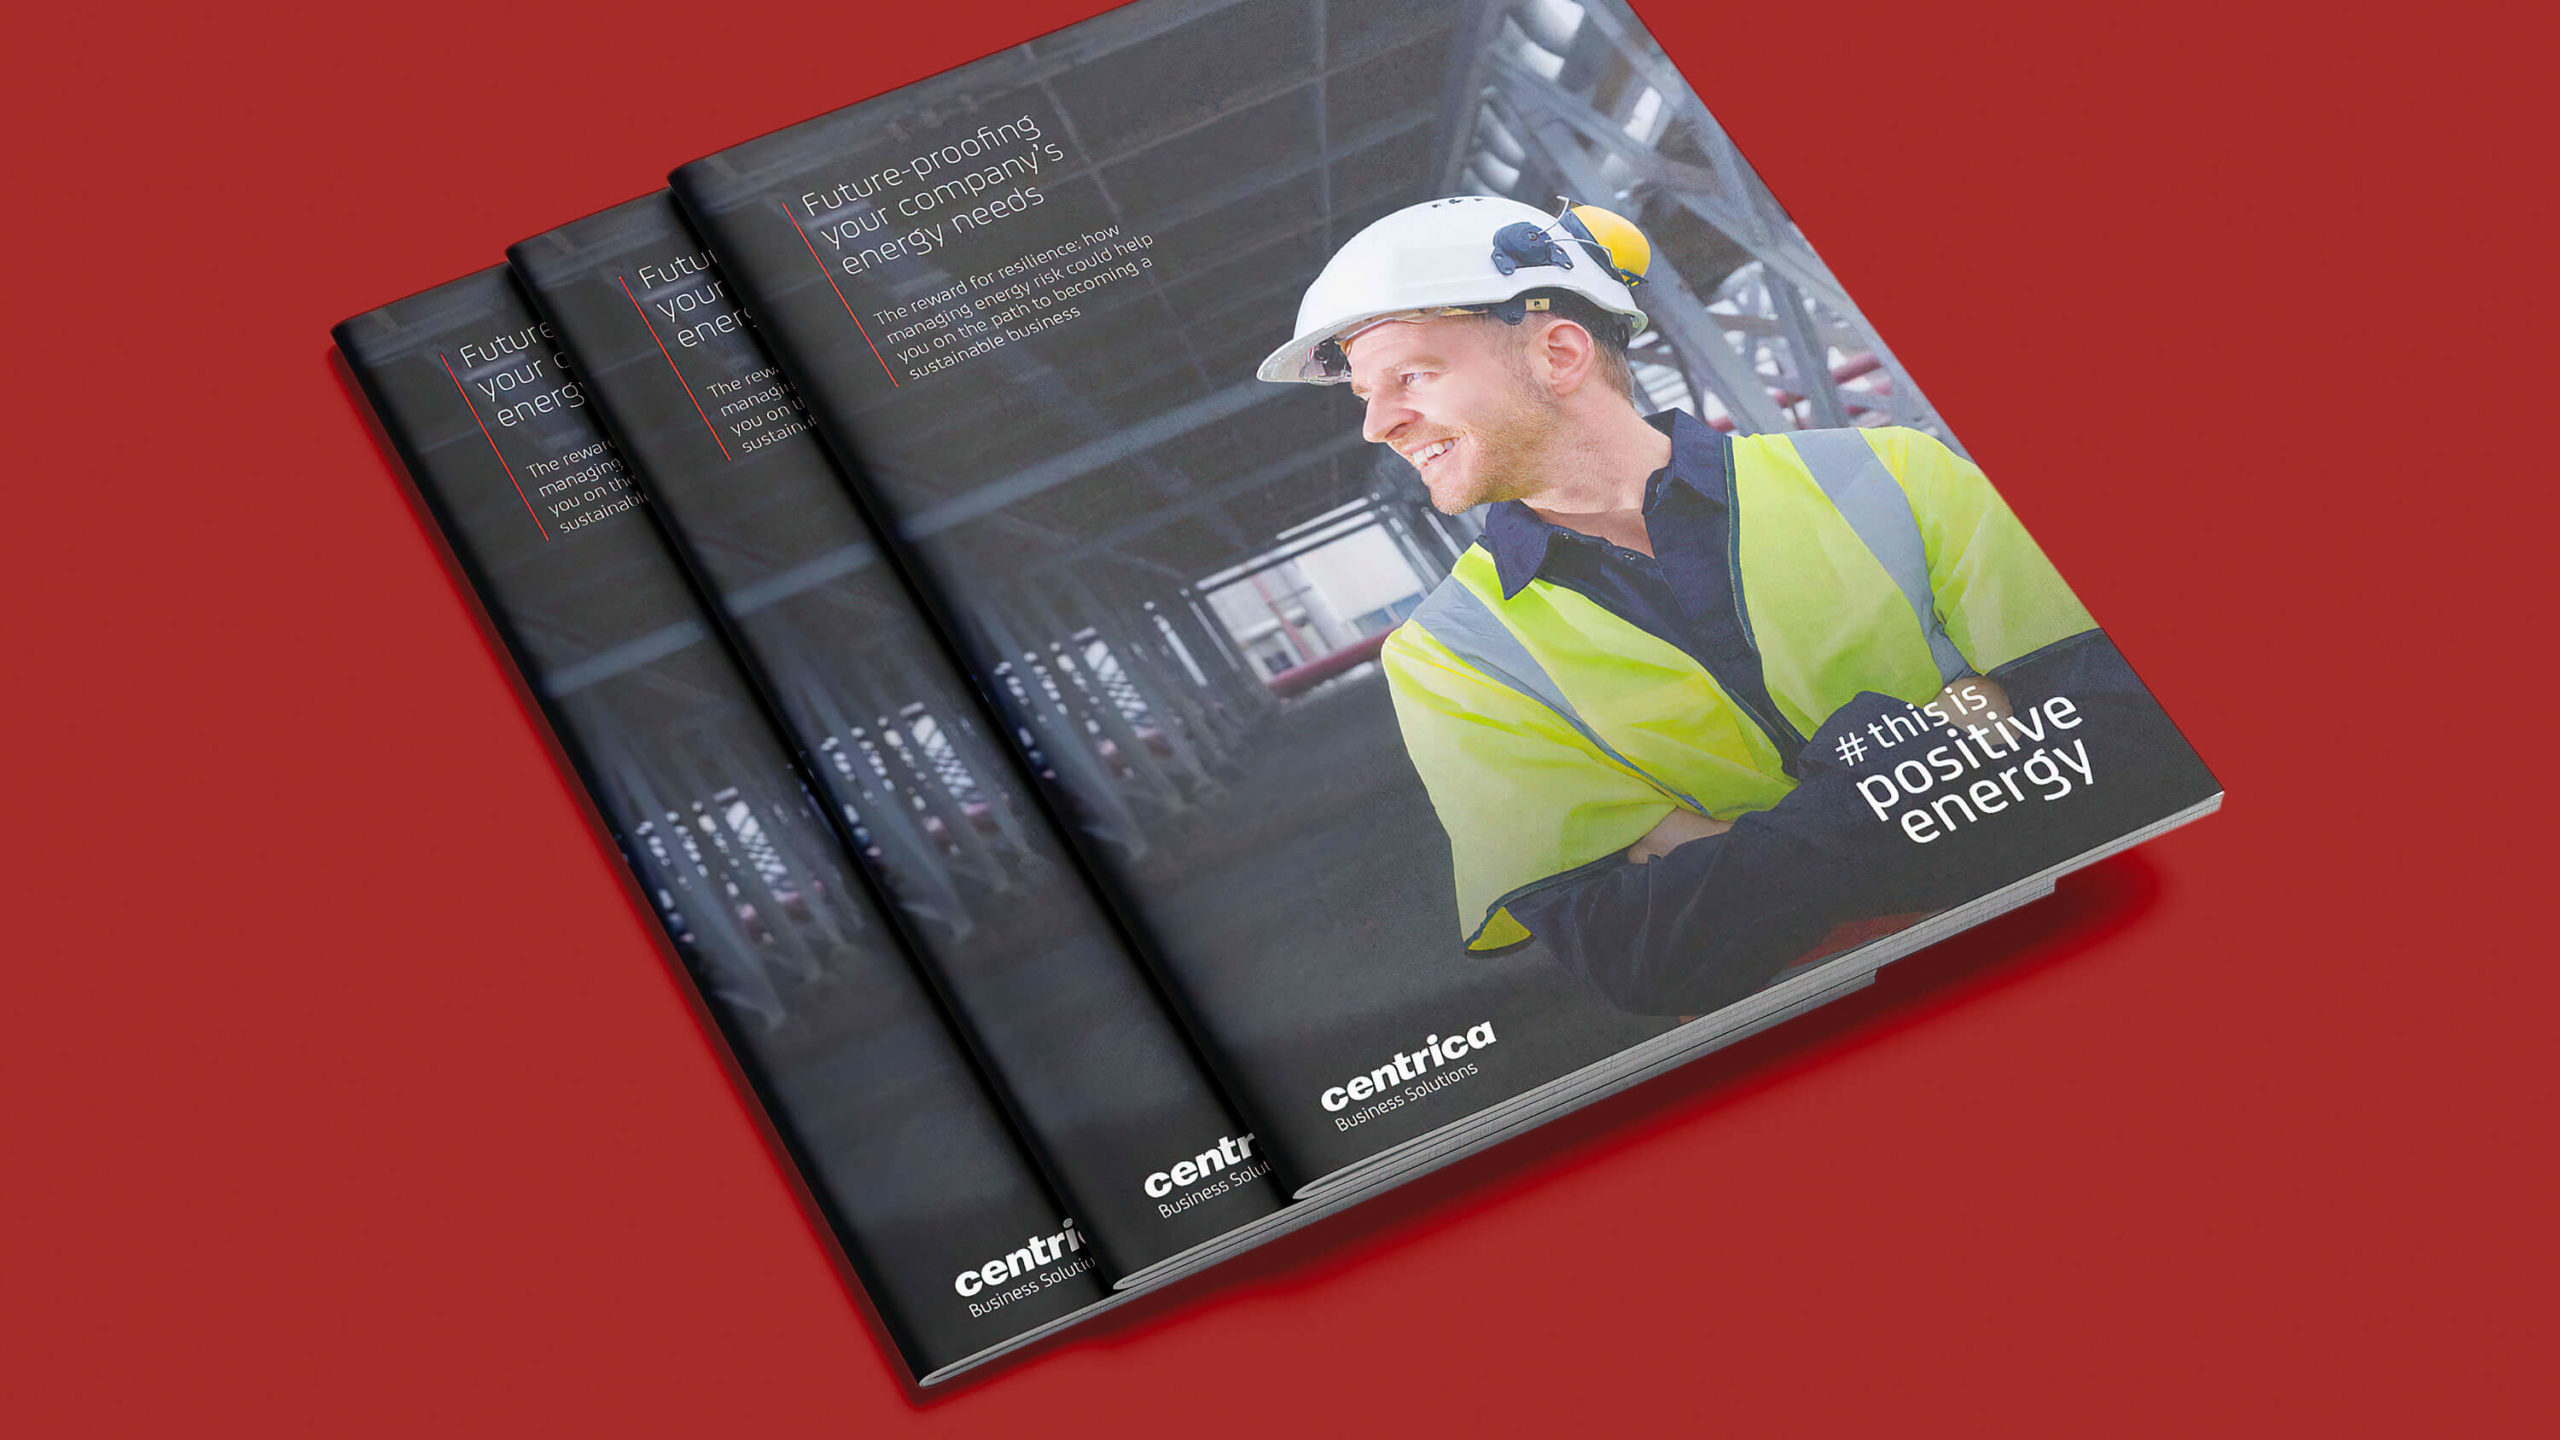 centrica-business-solutions-this-is-positive-energy-campaign-brochures-designhouse-scaled